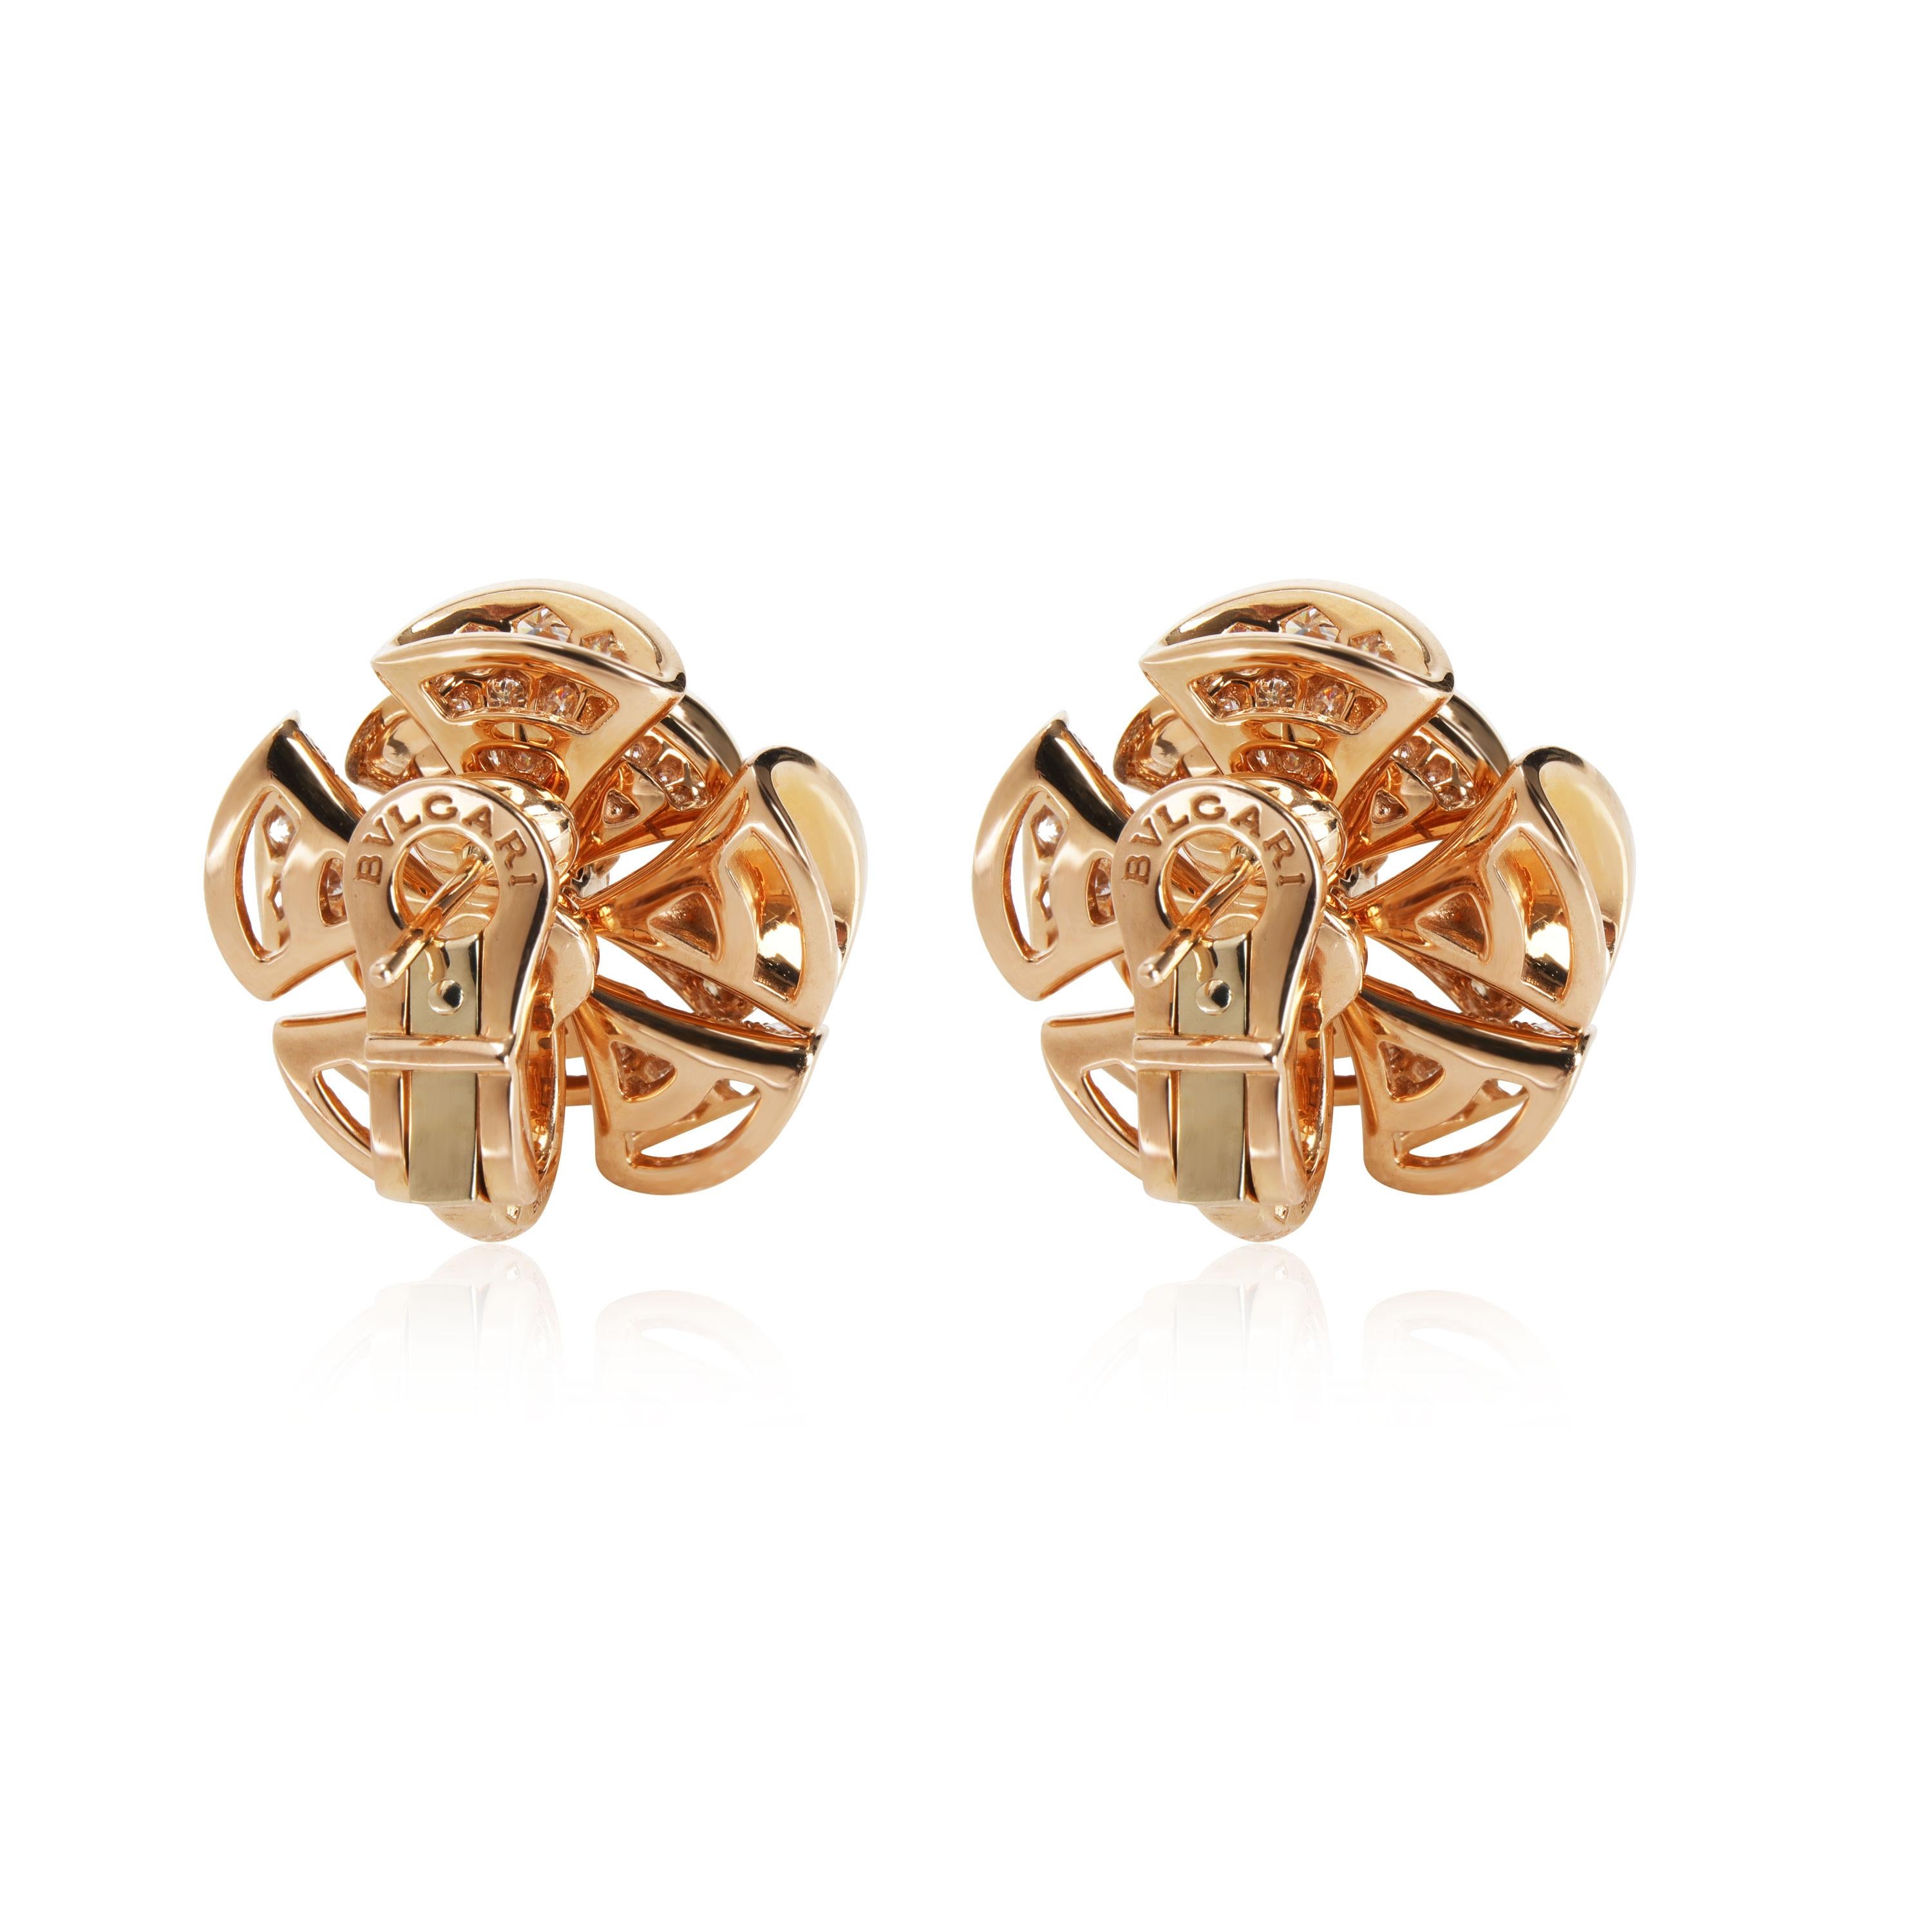 
Bulgari Divas' Dream Diamond Earrings in 18kt Rose Gold 2.6 CTW

PRIMARY DETAILS
SKU: 113663
Listing Title: Bulgari Divas' Dream Diamond Earrings in 18kt Rose Gold 2.6 CTW
Condition Description: Retails for 34000 USD. In excellent condition and